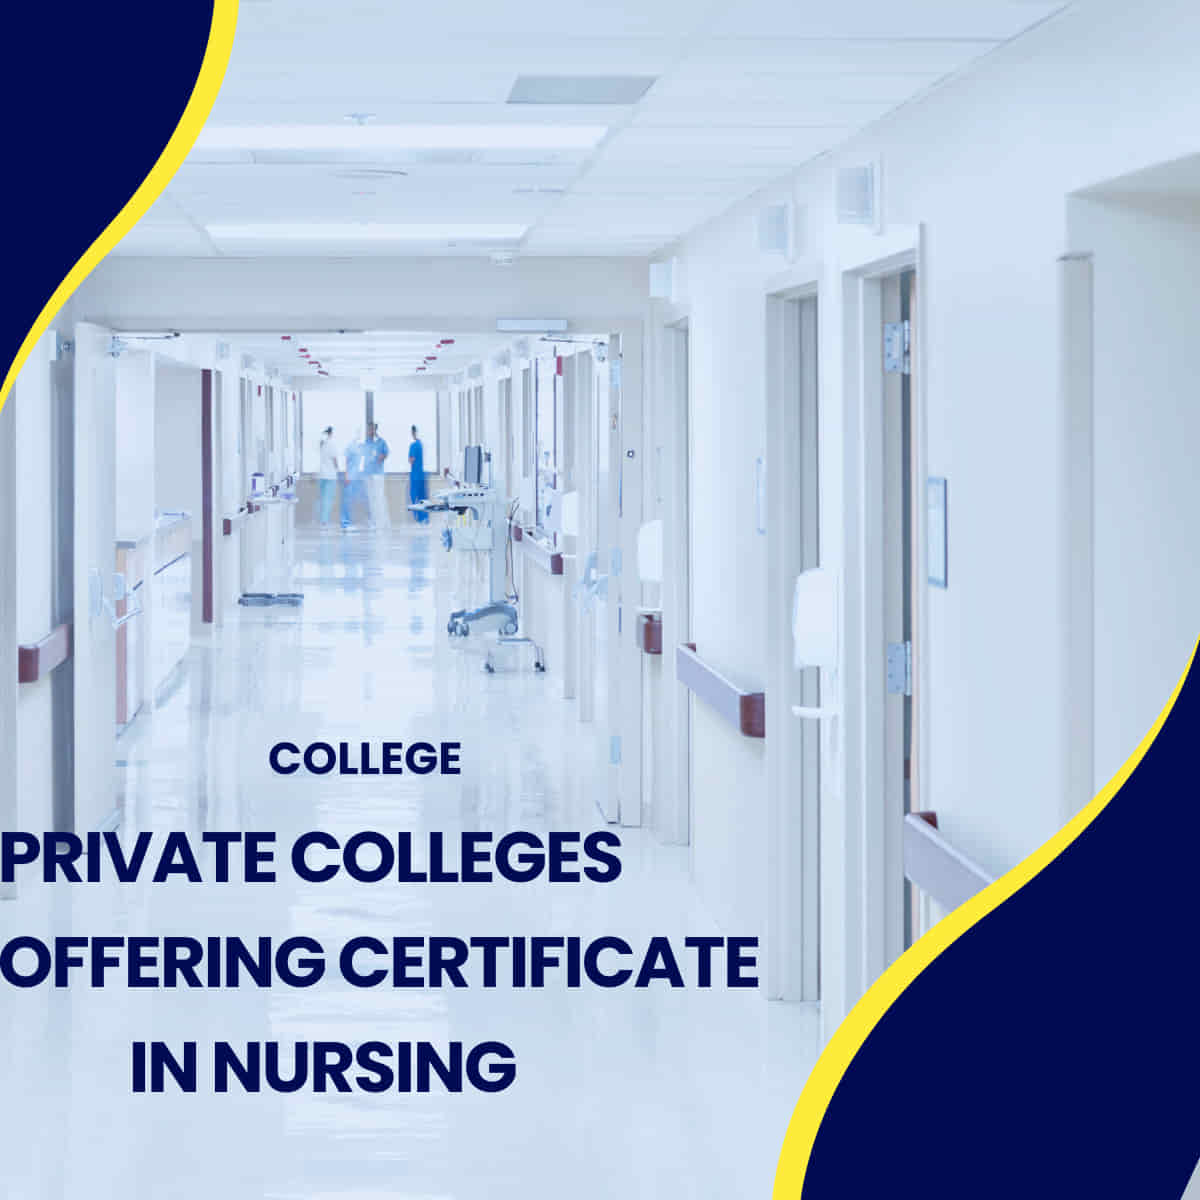 Private colleges offering certificate in nursing